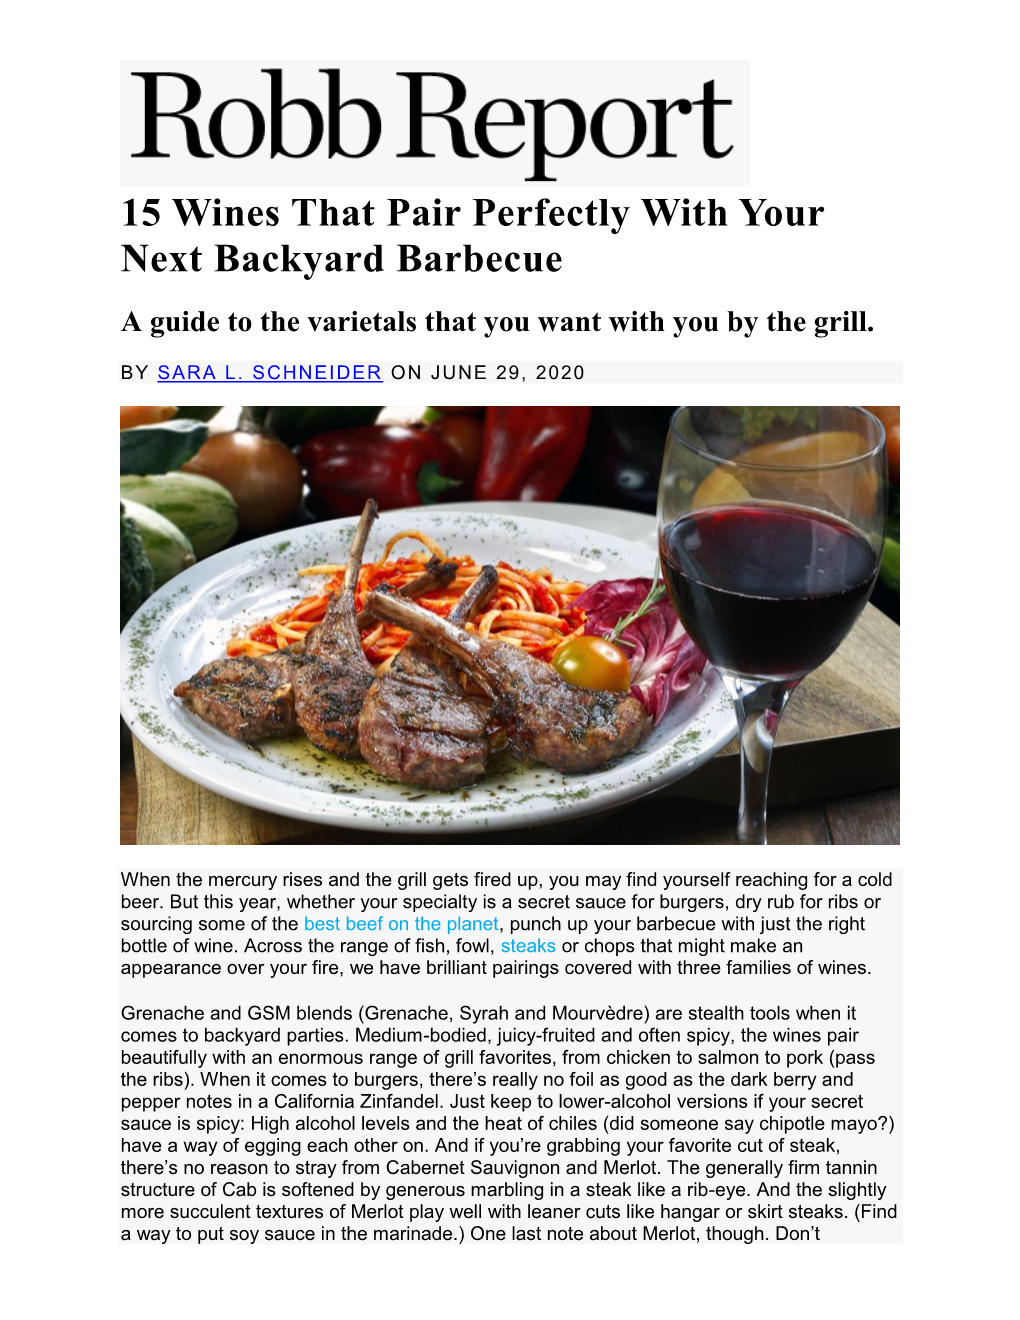 15 Wines That Pair Perfectly with Your Next Backyard Barbecue a Guide to the Varietals That You Want with You by the Grill